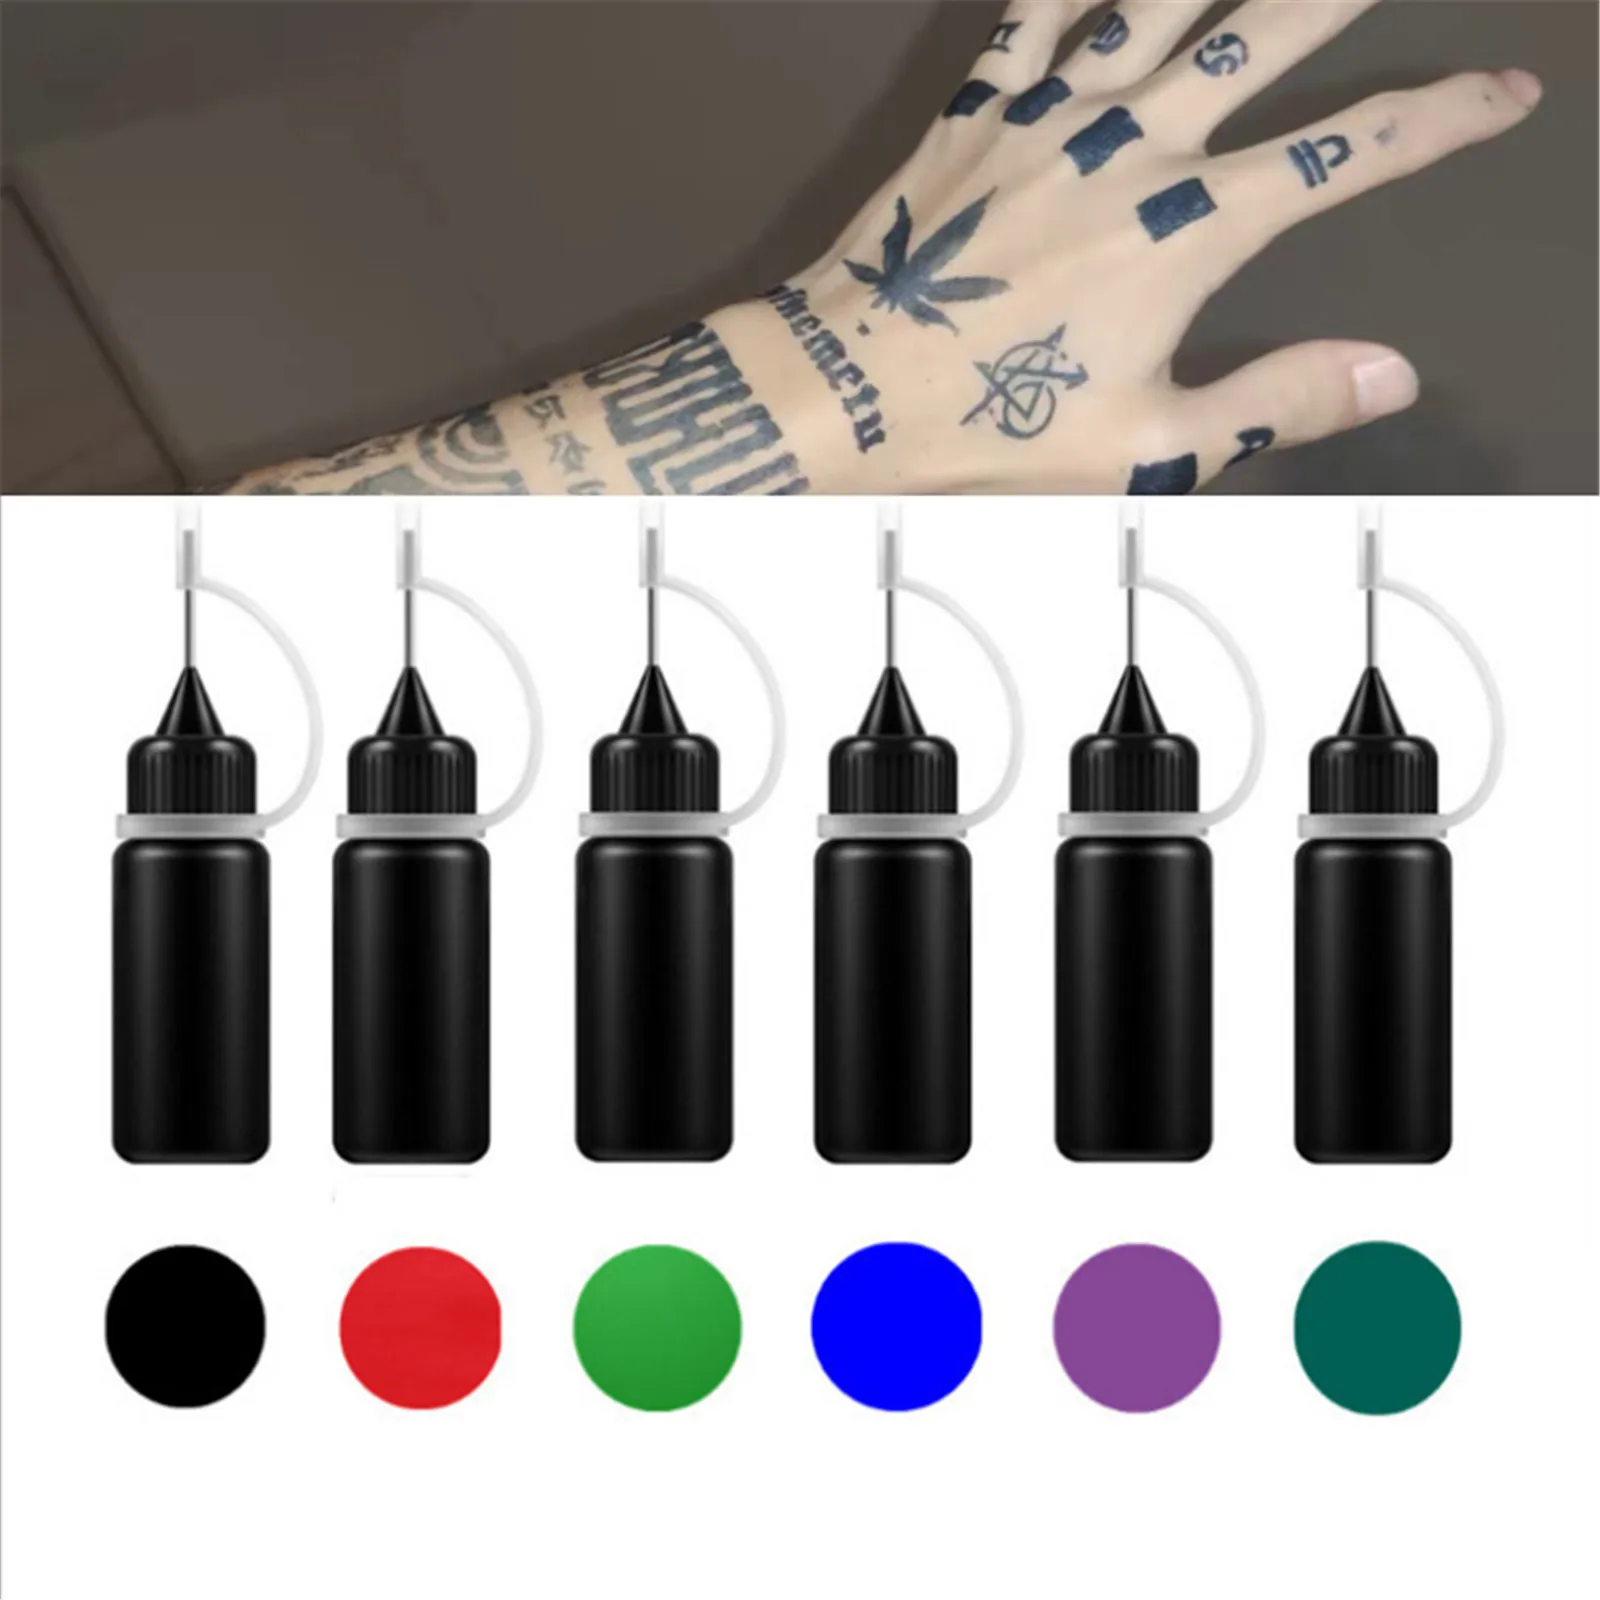 

Professional Tattoo Ink Water Colours Magenta Not Permanent Black Temporary Waterproof Pigments Mix Solution Body Natural Art